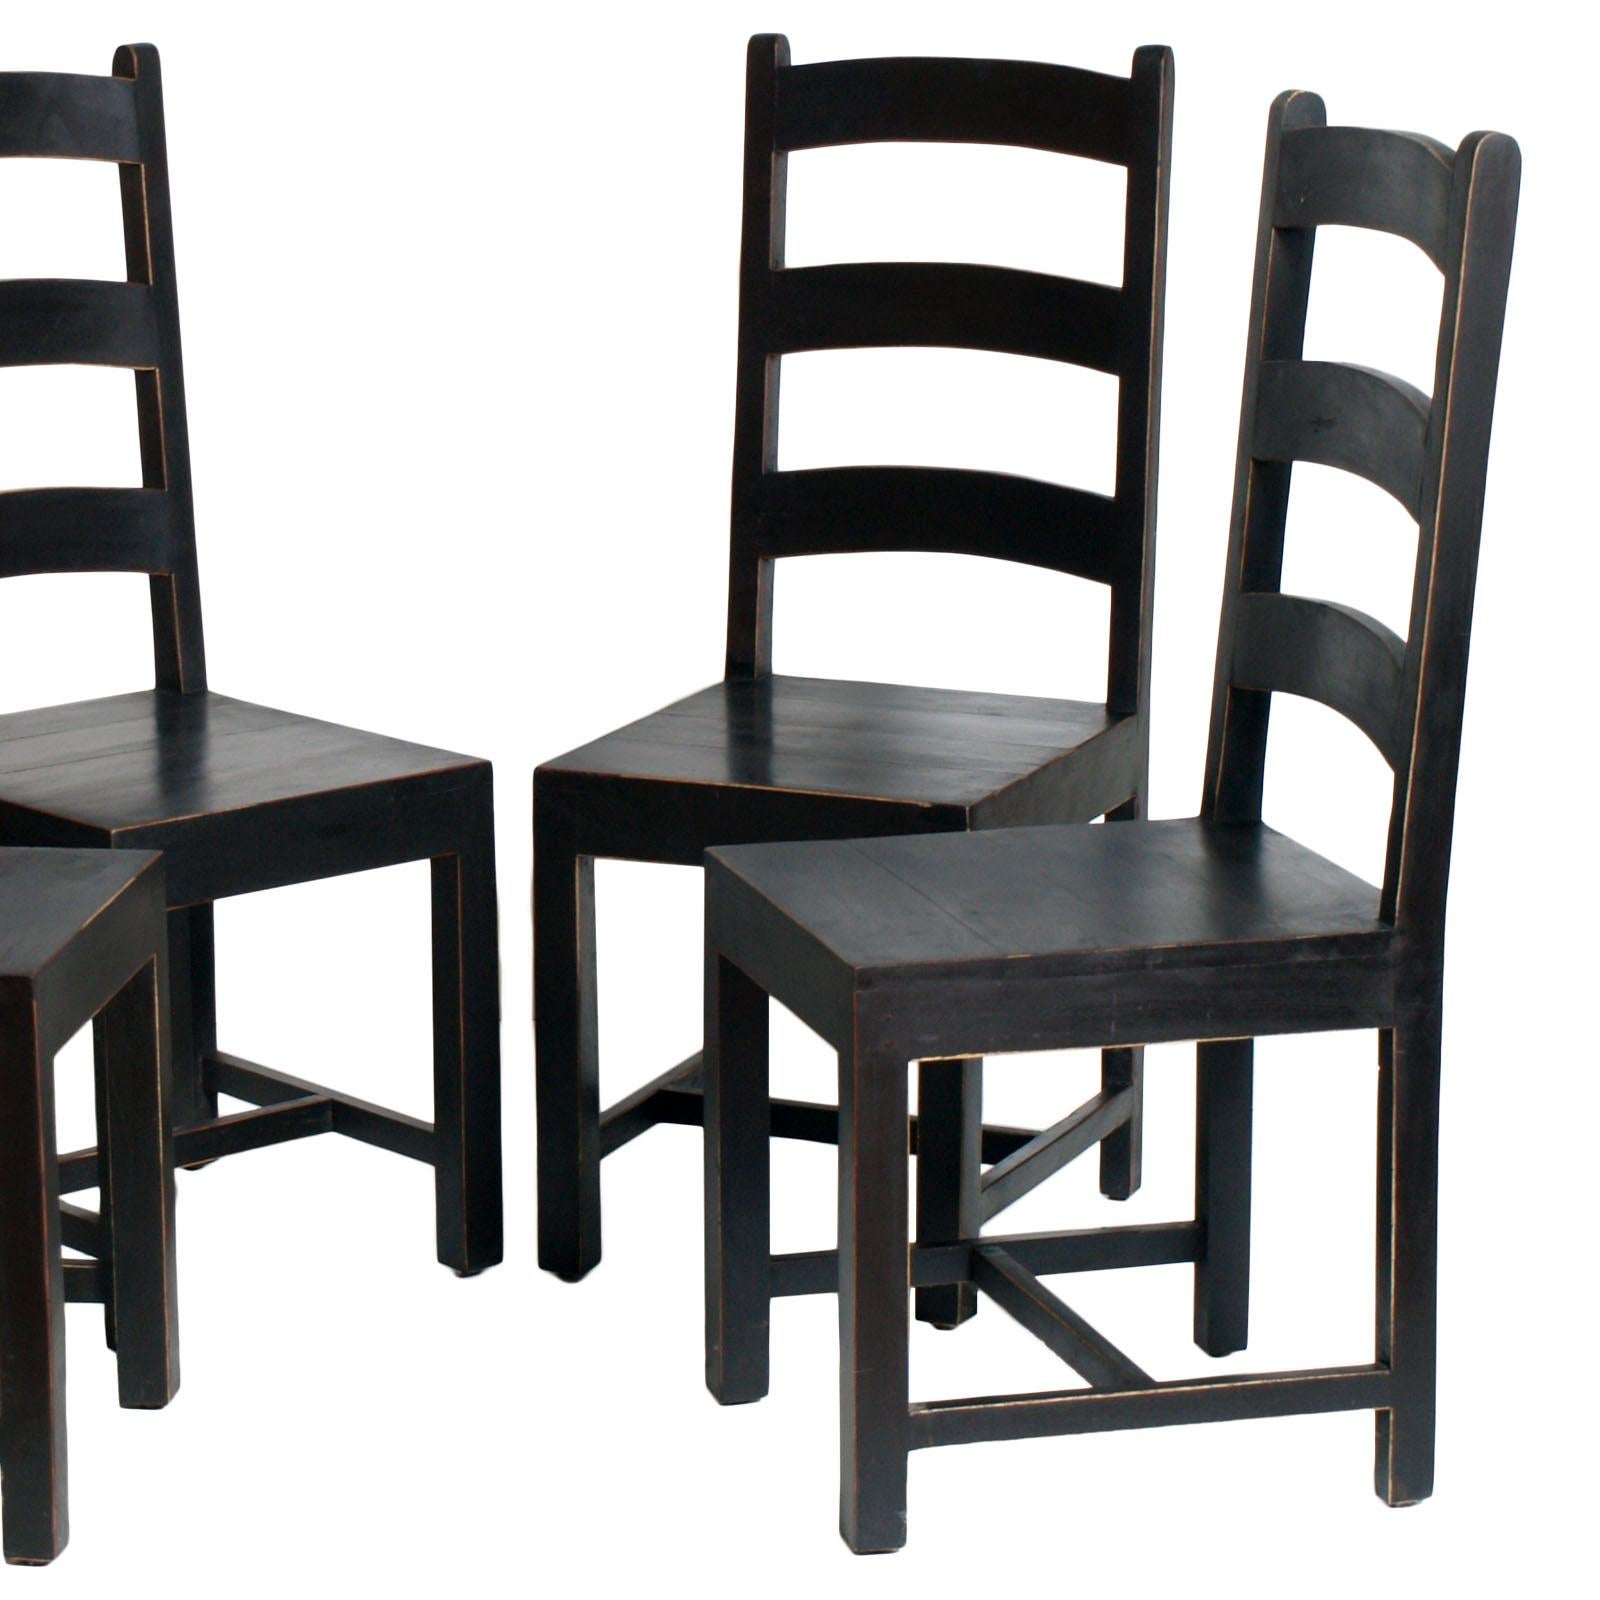 Italian Solid Country Art Deco Four Chairs in Ebonized Oak Restored and Wax-Polished For Sale